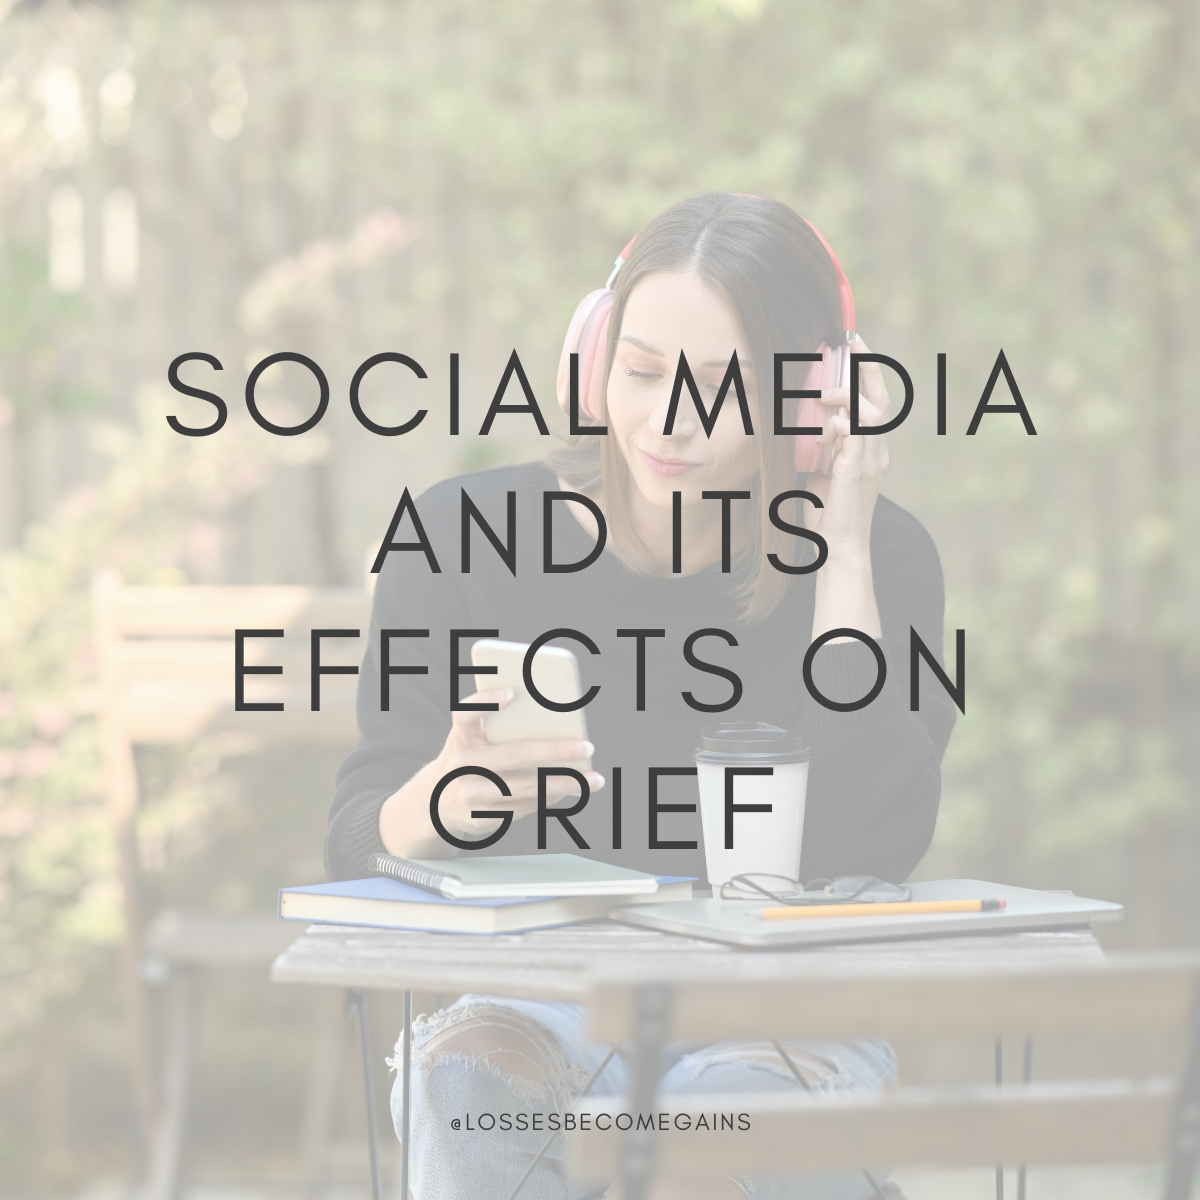 Social Media & Its Effects on Grief by Losses Become Gains